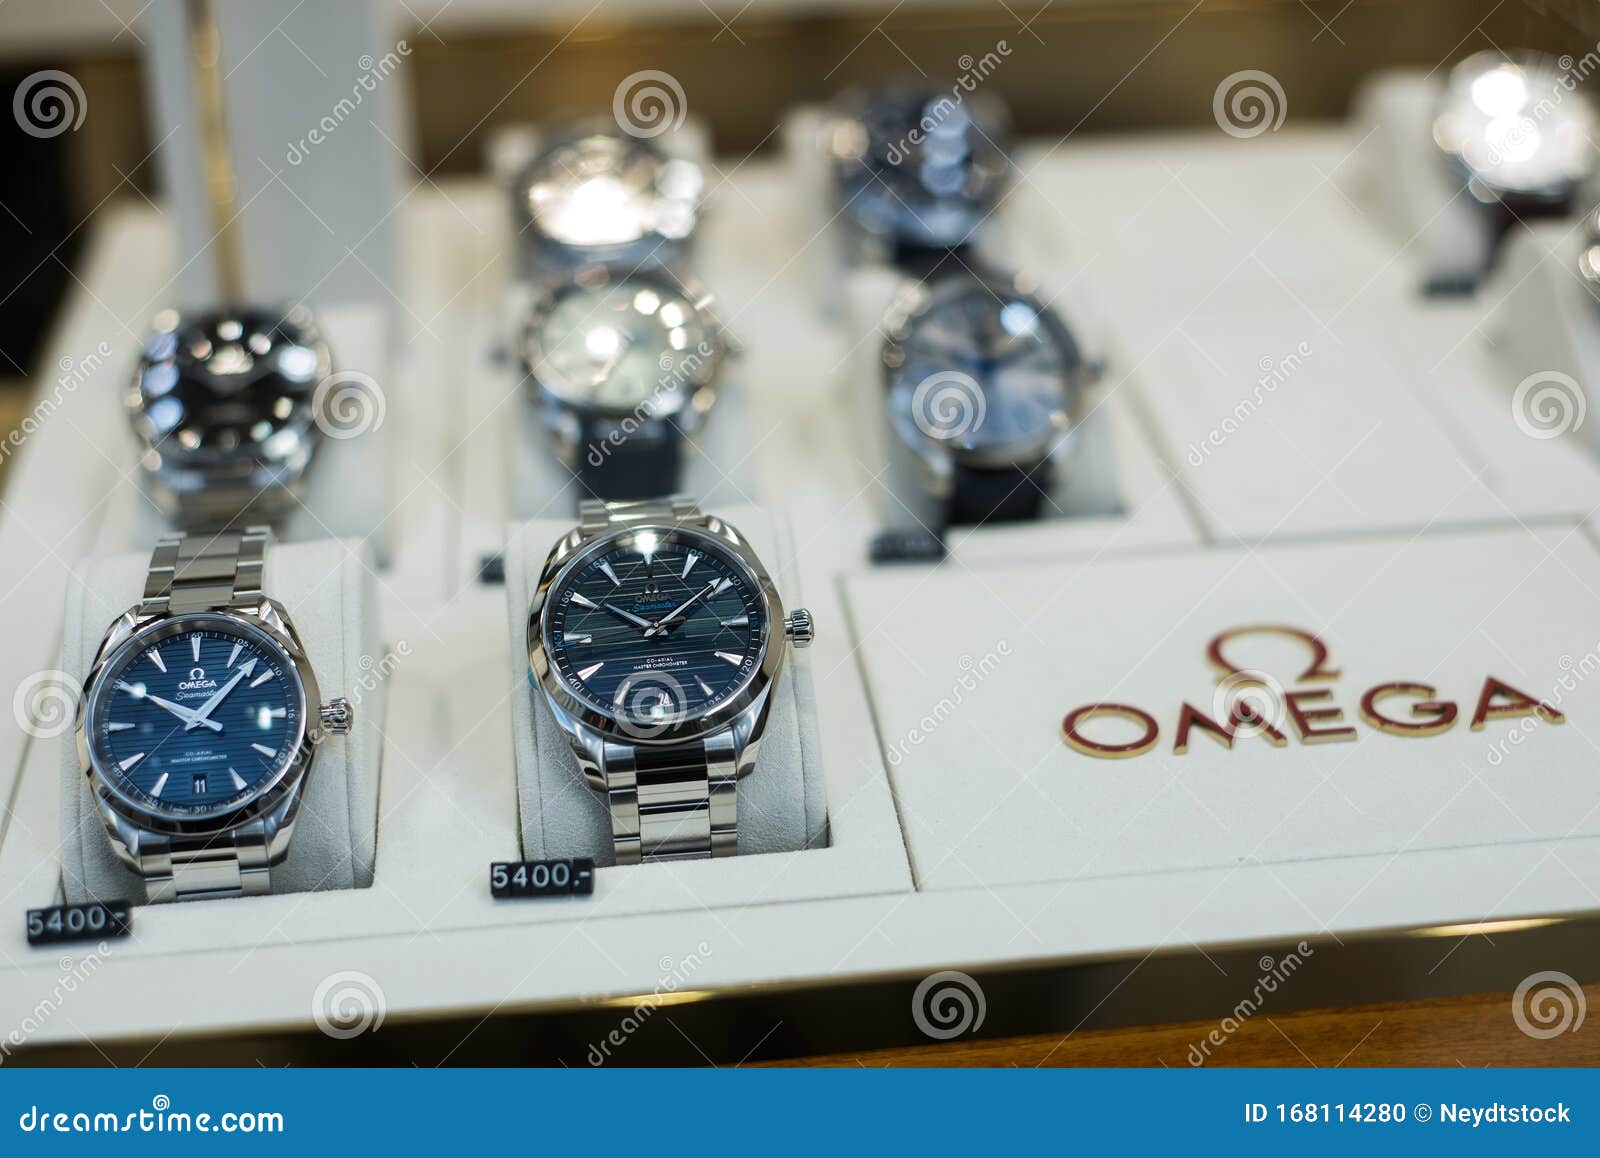 Swiss Watches by Omega in a Jewelry Showroom Editorial Image - Image of ...